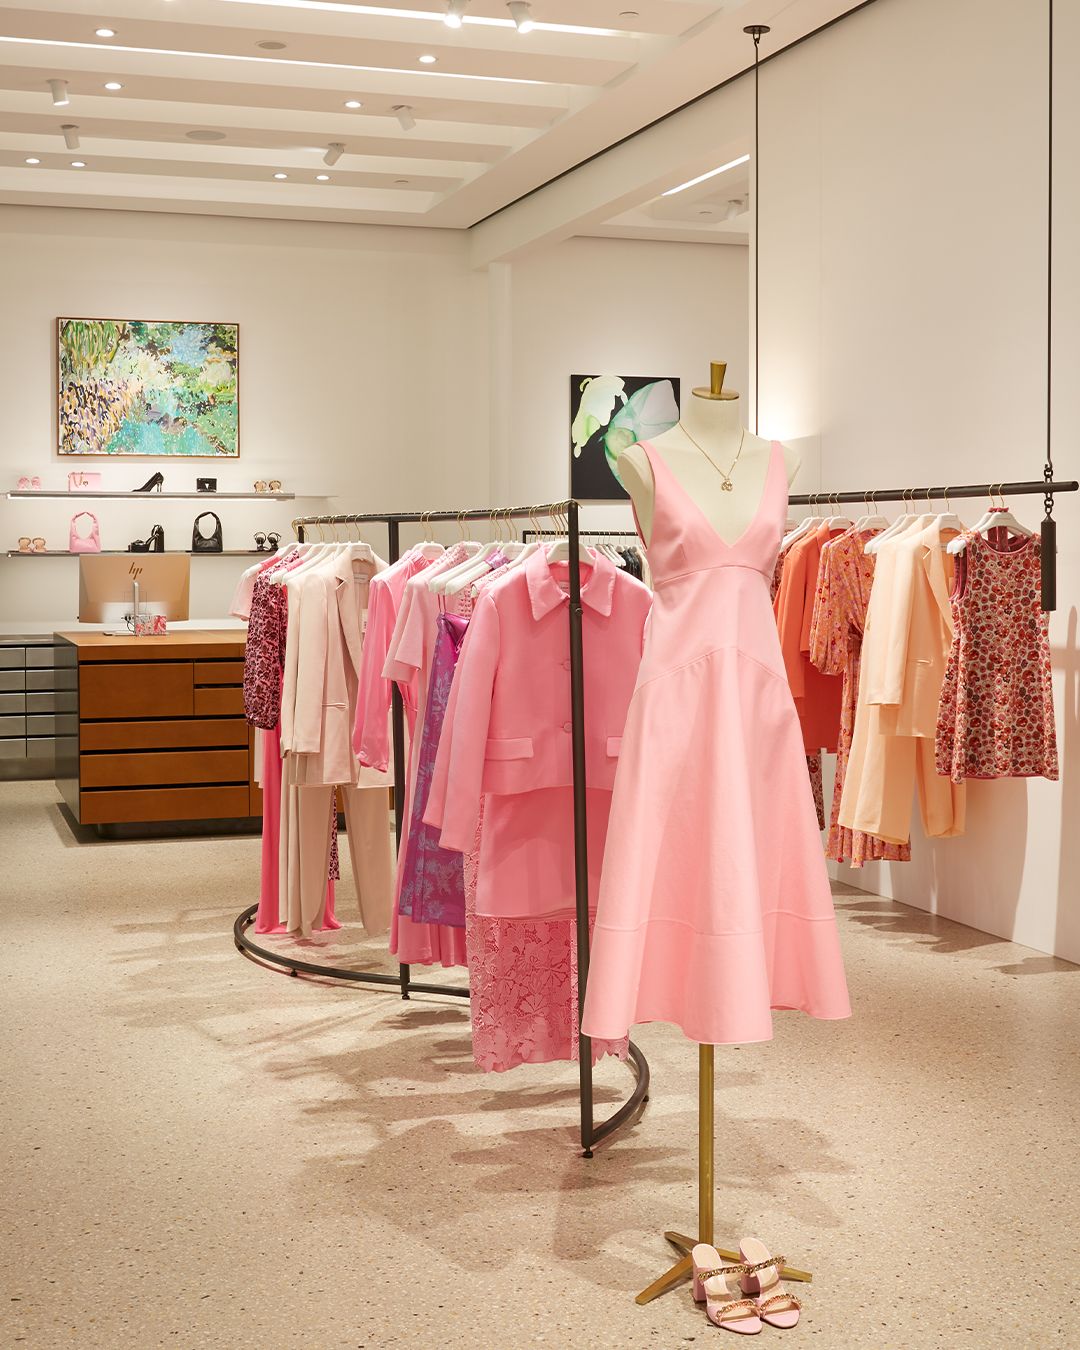 Interior of women's fashion boutique with clothing ranks feautirng pink and orange clothing